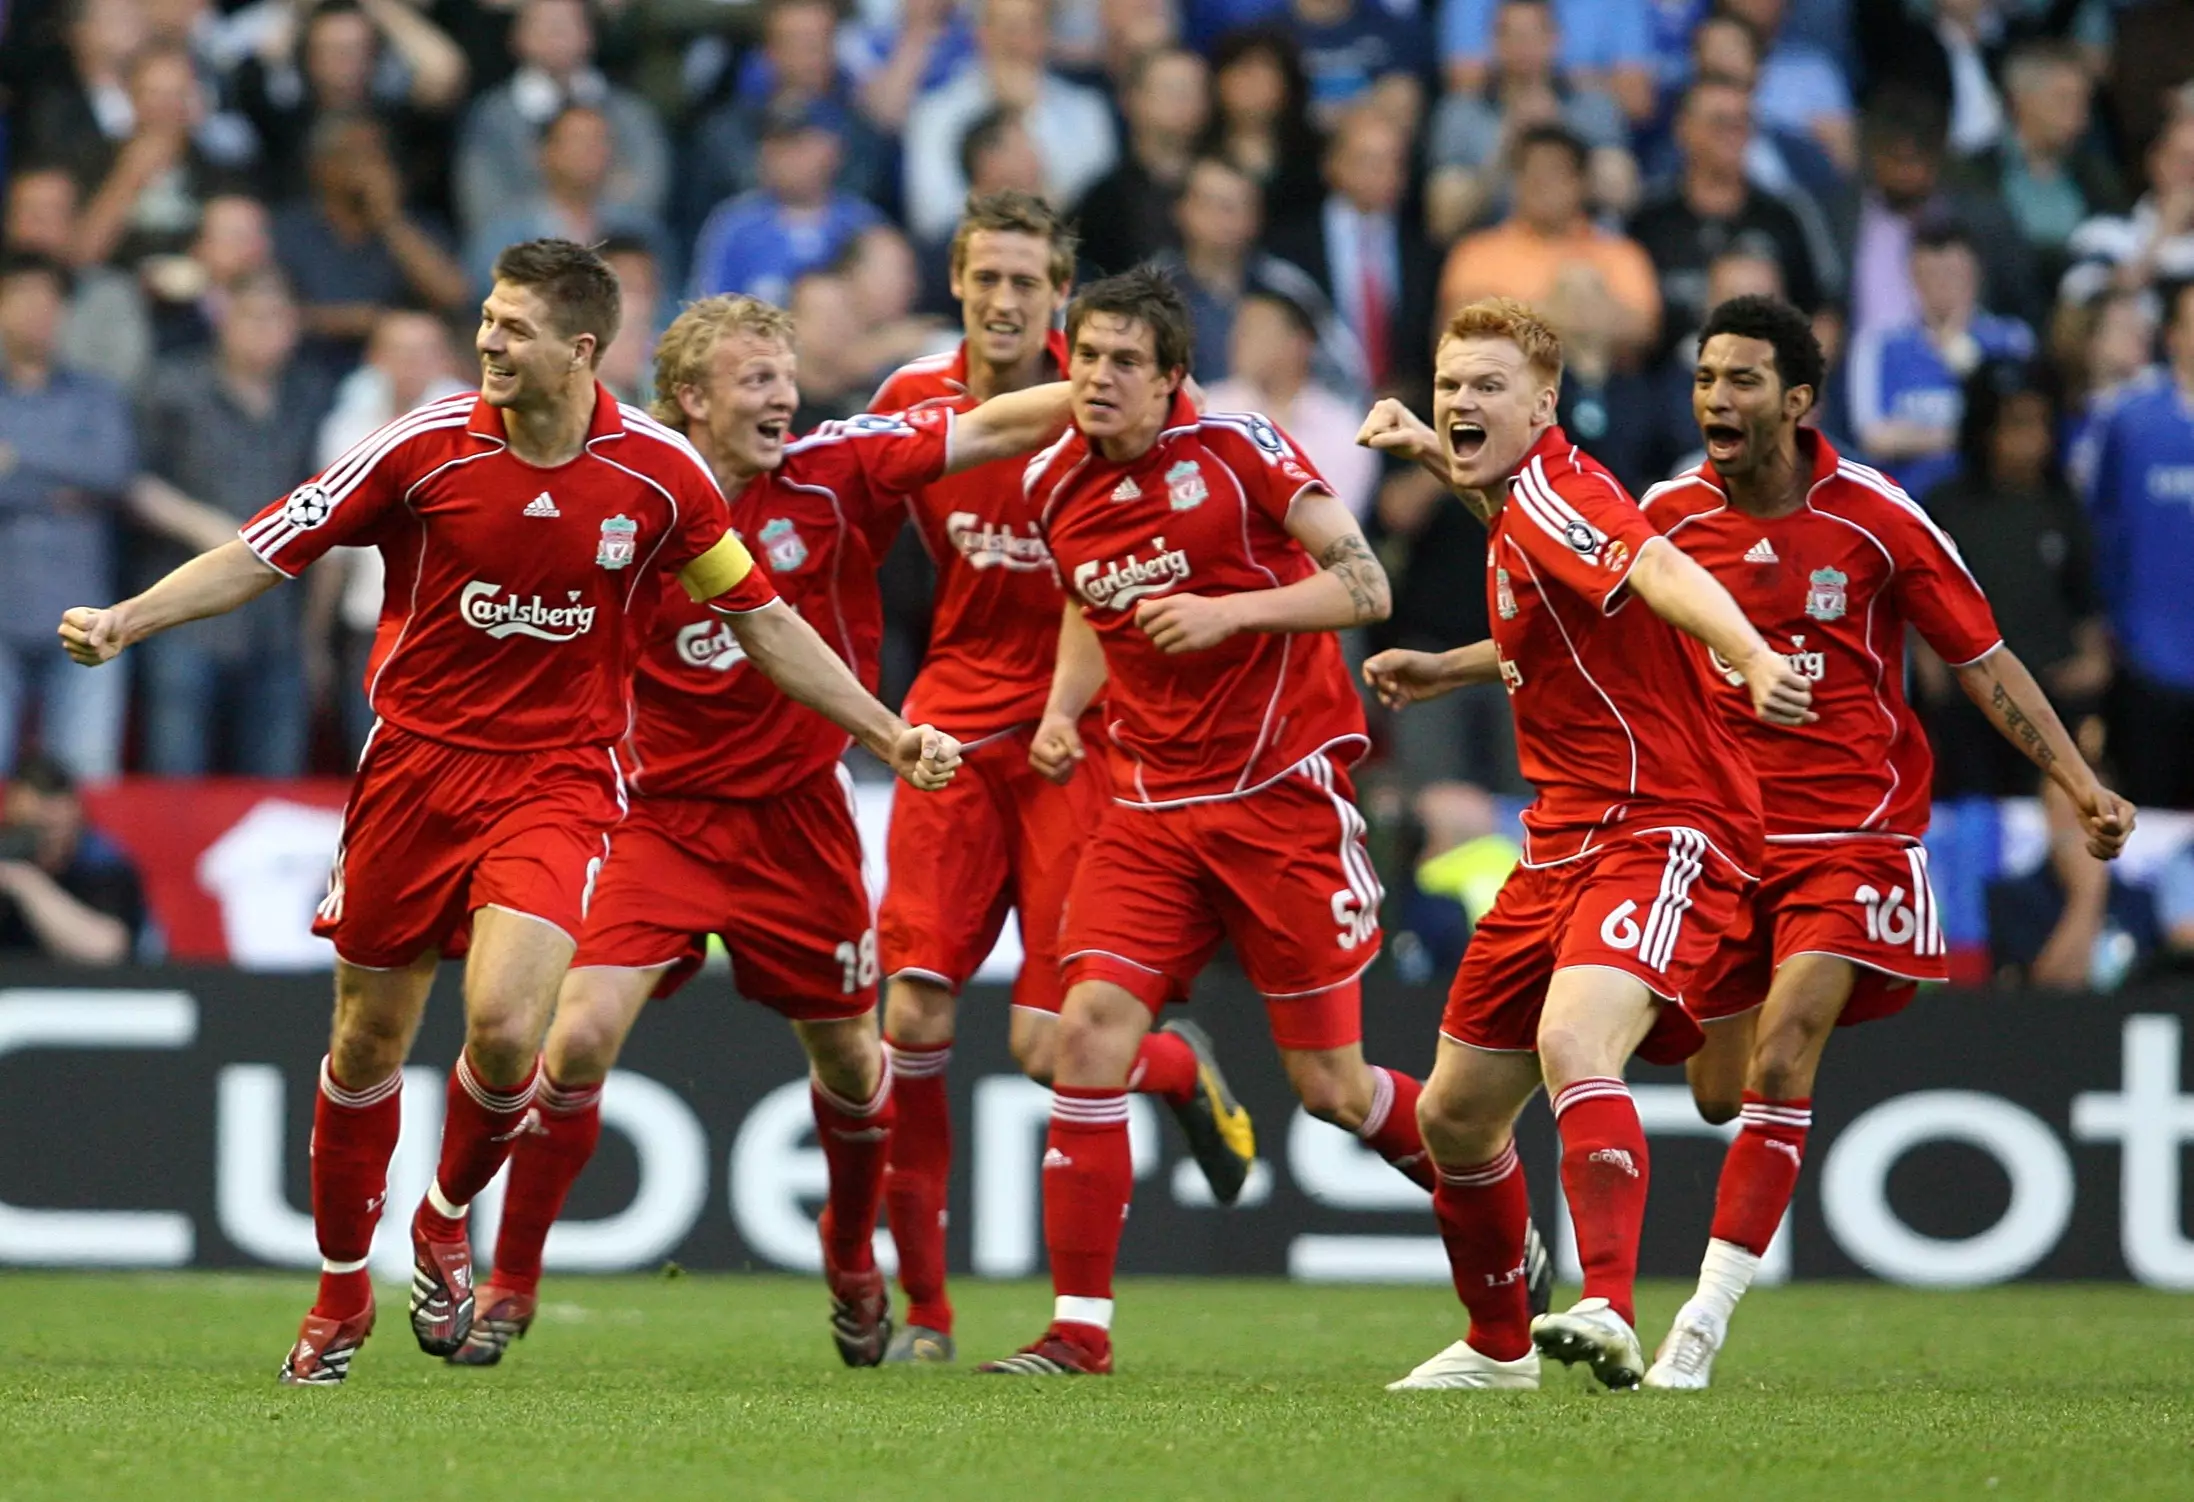 Liverpool celebrate getting to the Champions League final. Image: PA Images